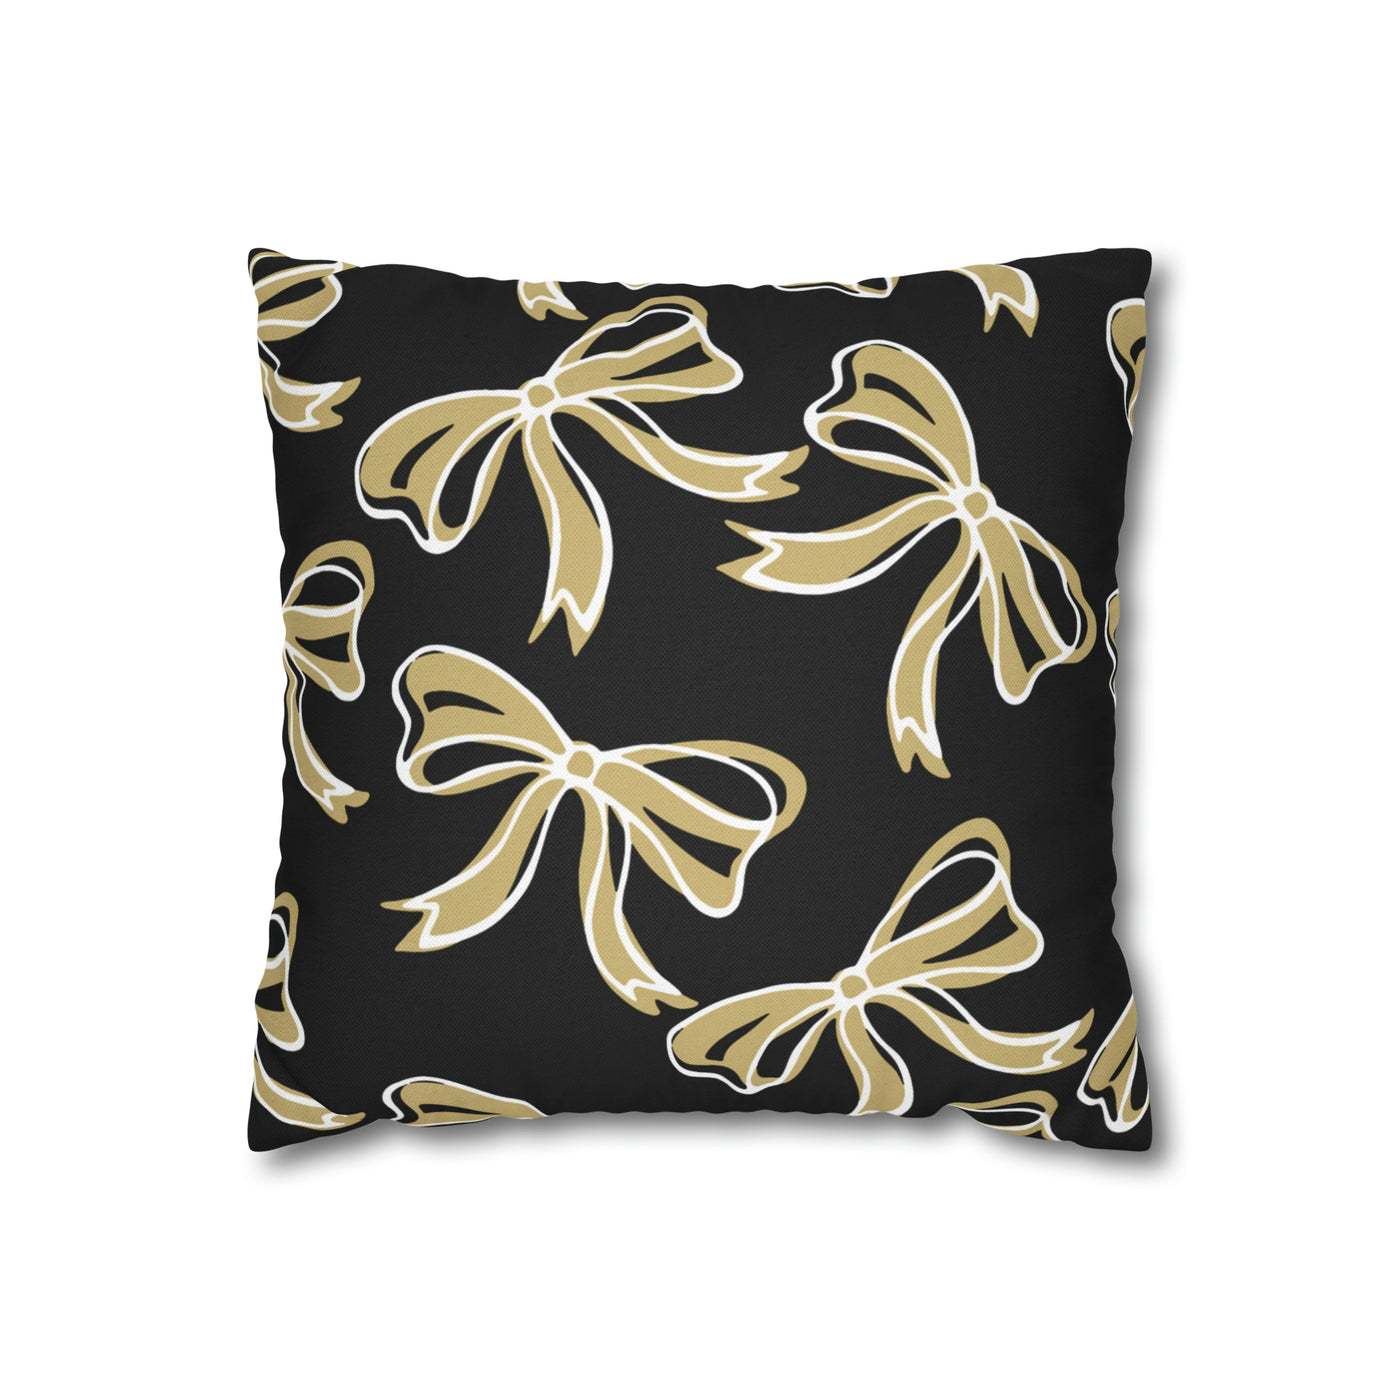 Trendy Bow College Pillow Cover - Dorm Pillow, Graduation Gift, Bed Party Gift, Acceptance Gift, College Gift, CU Boulder, UCF, Wake Forest,